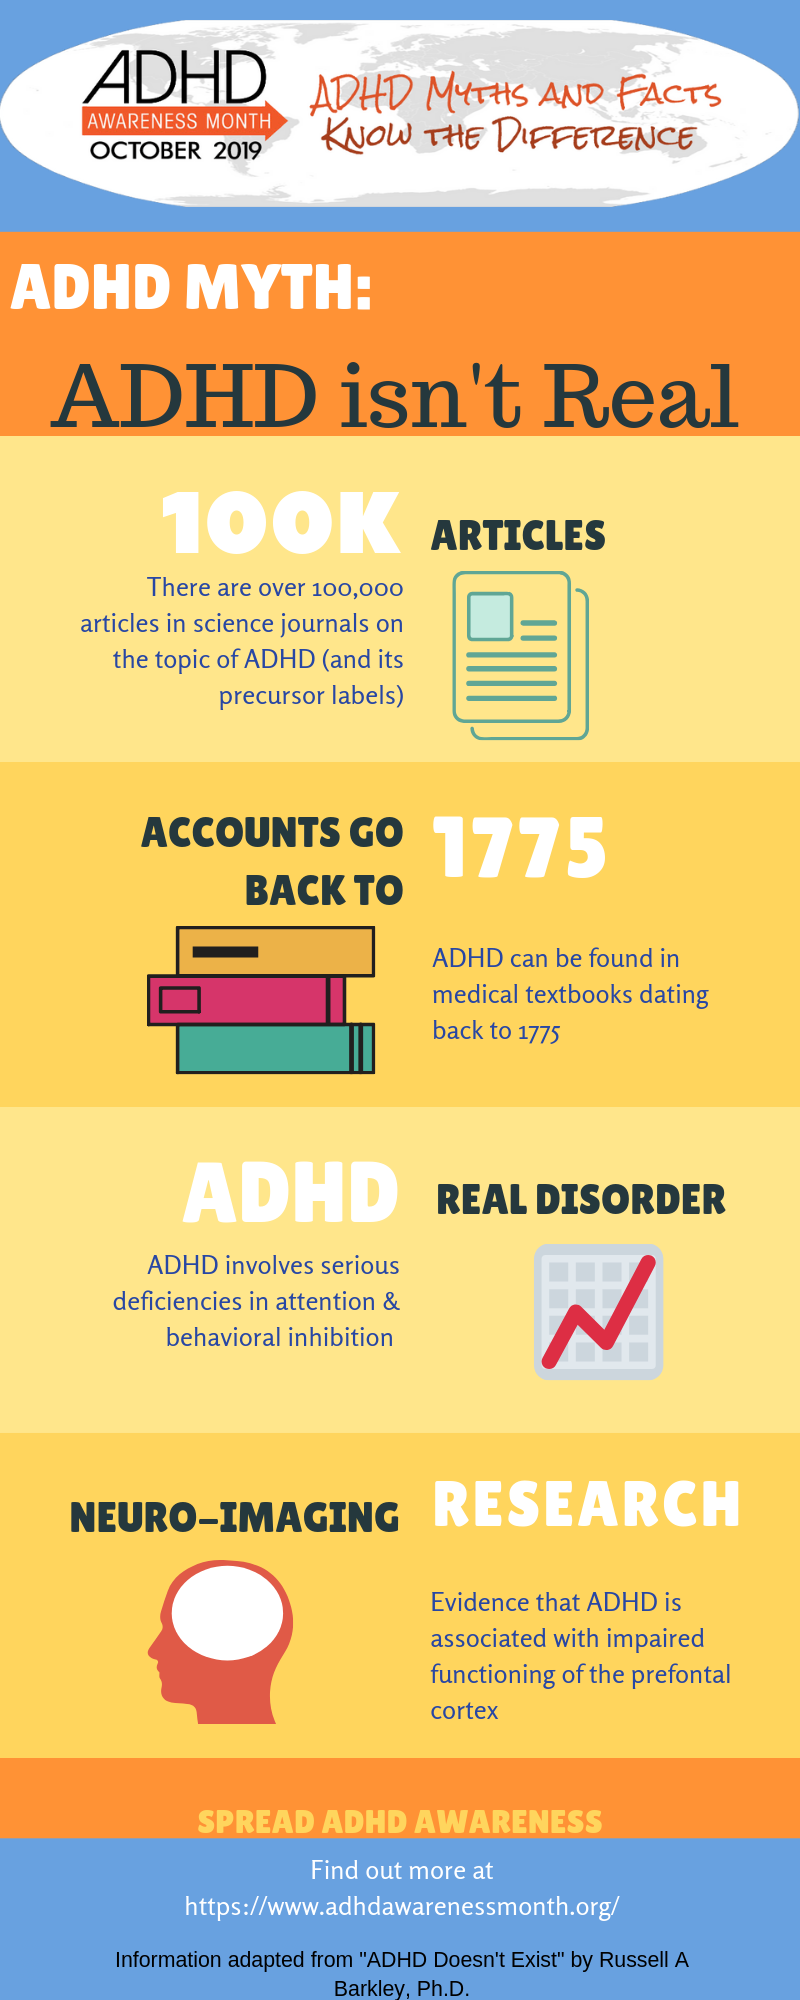 ADHD Is Real 1 